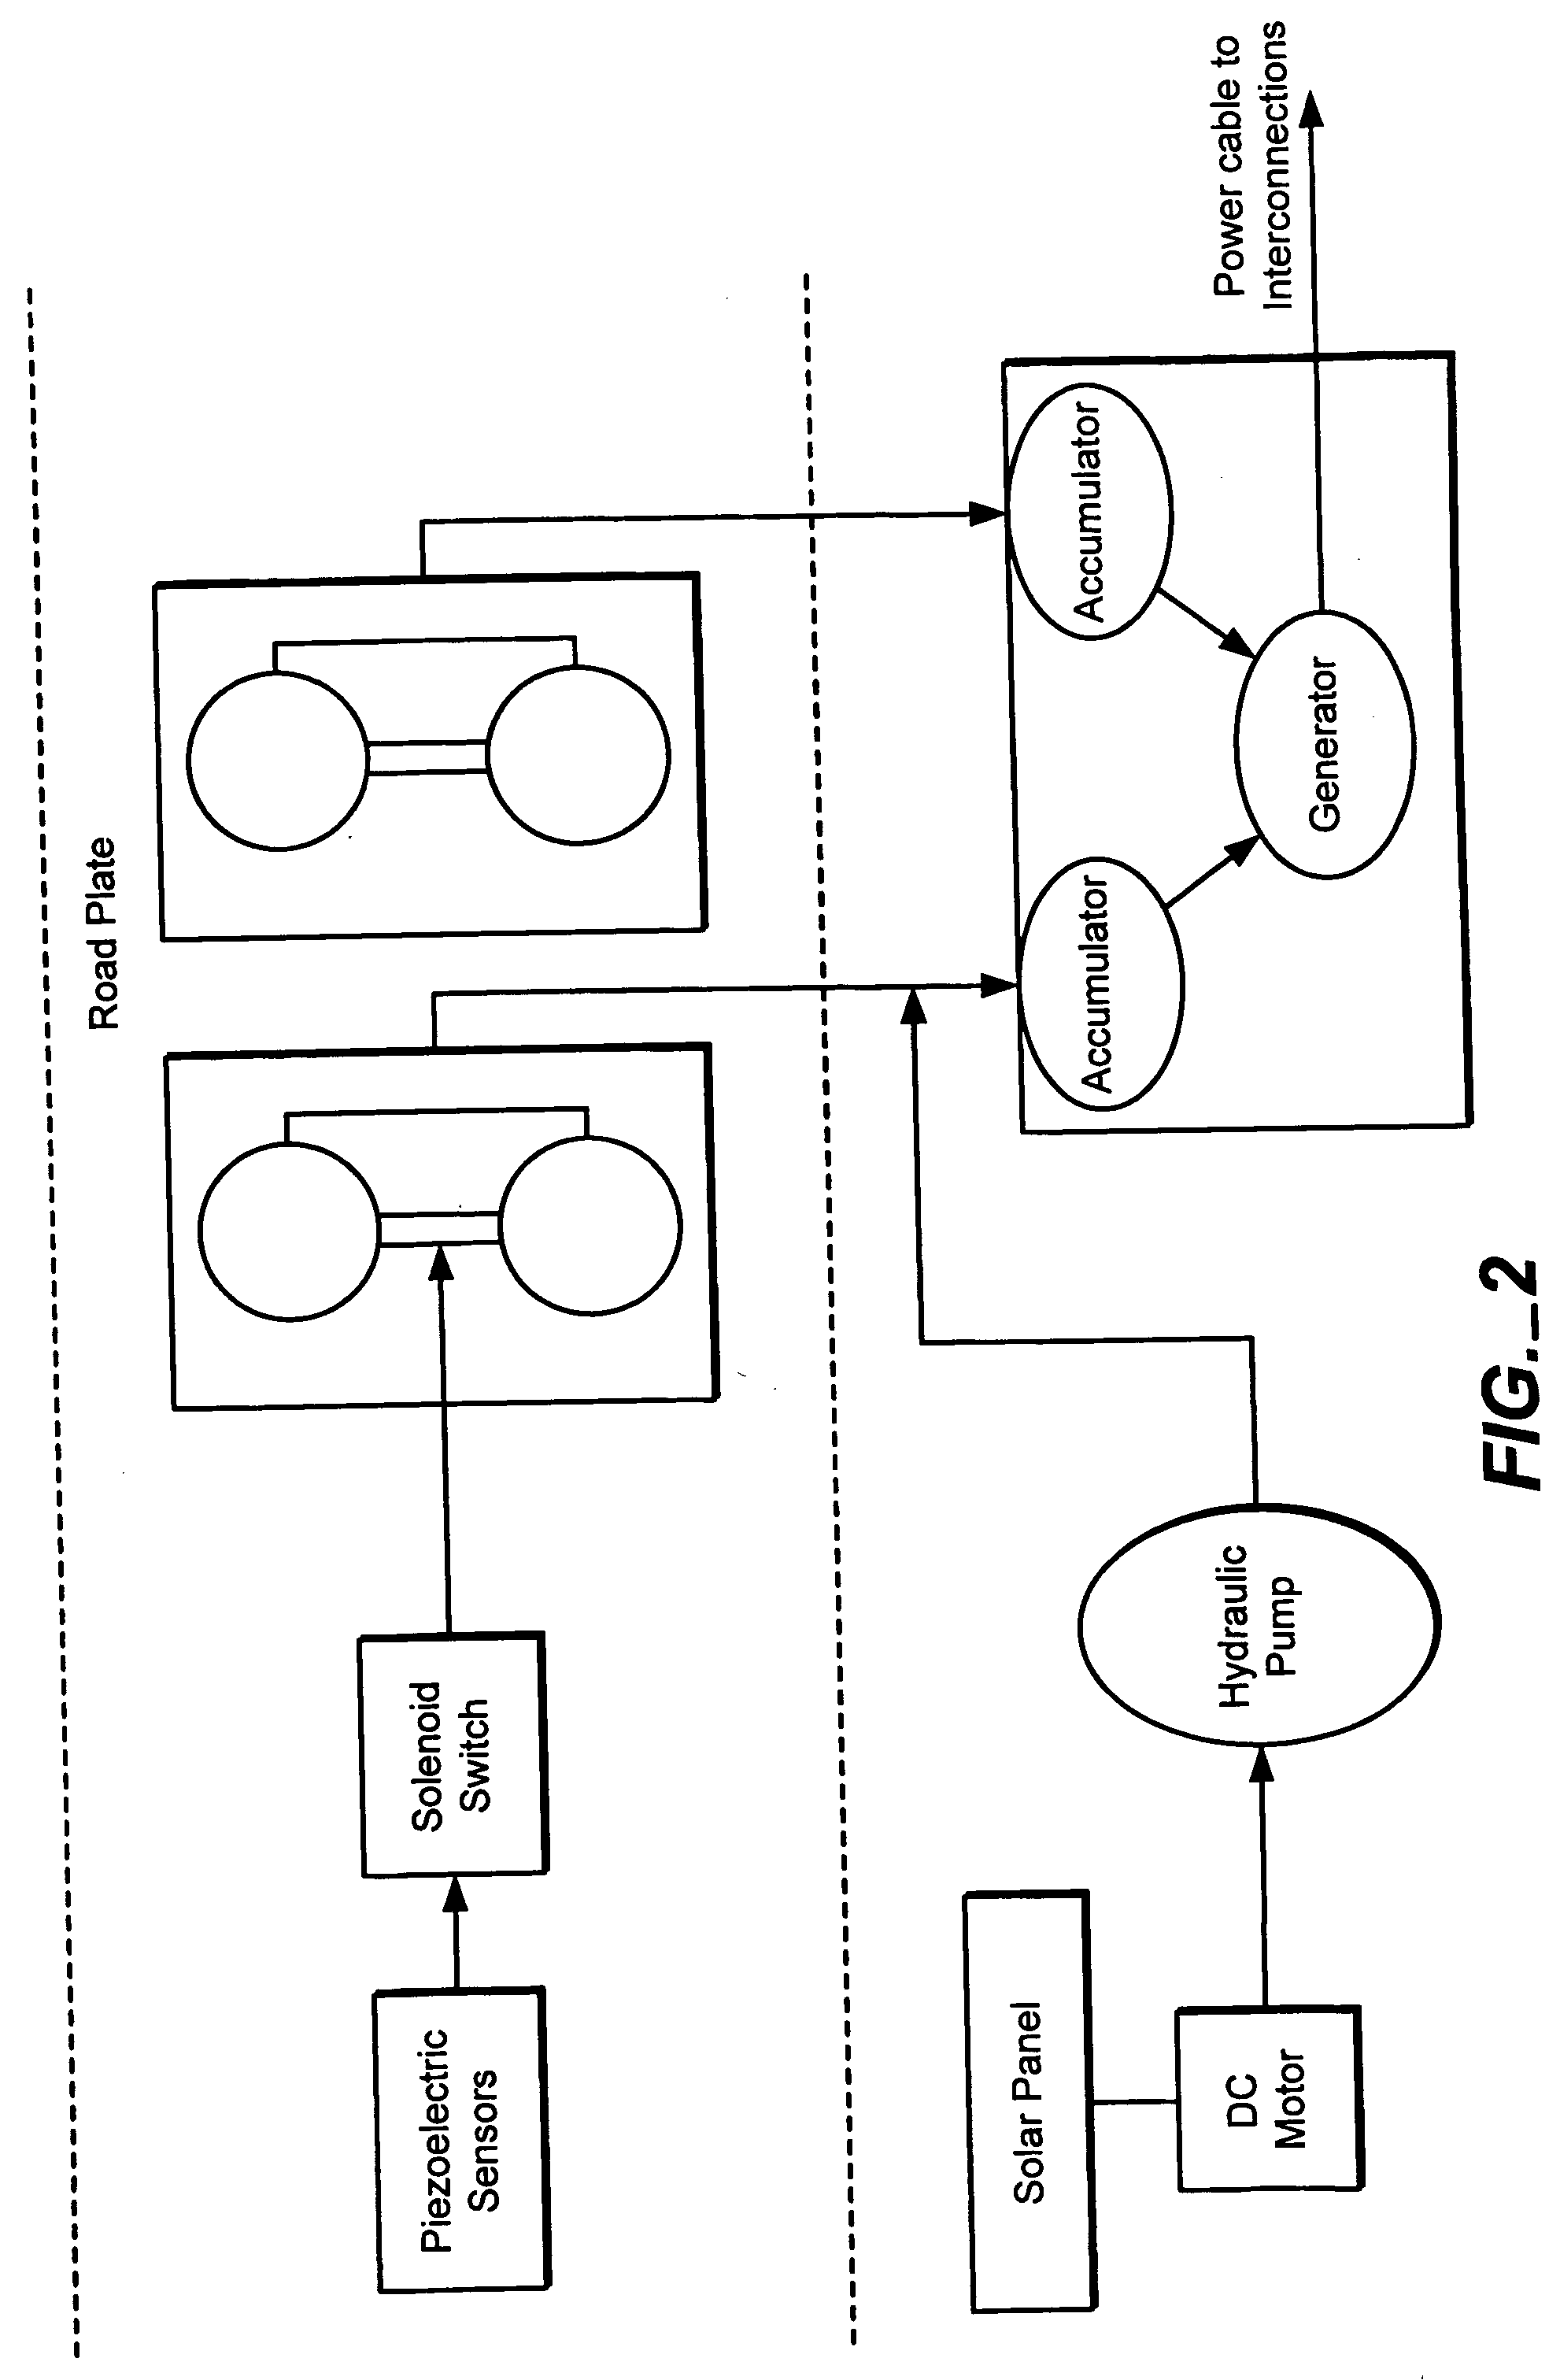 System and method for electrical power generation utilizing vehicle traffic on roadways